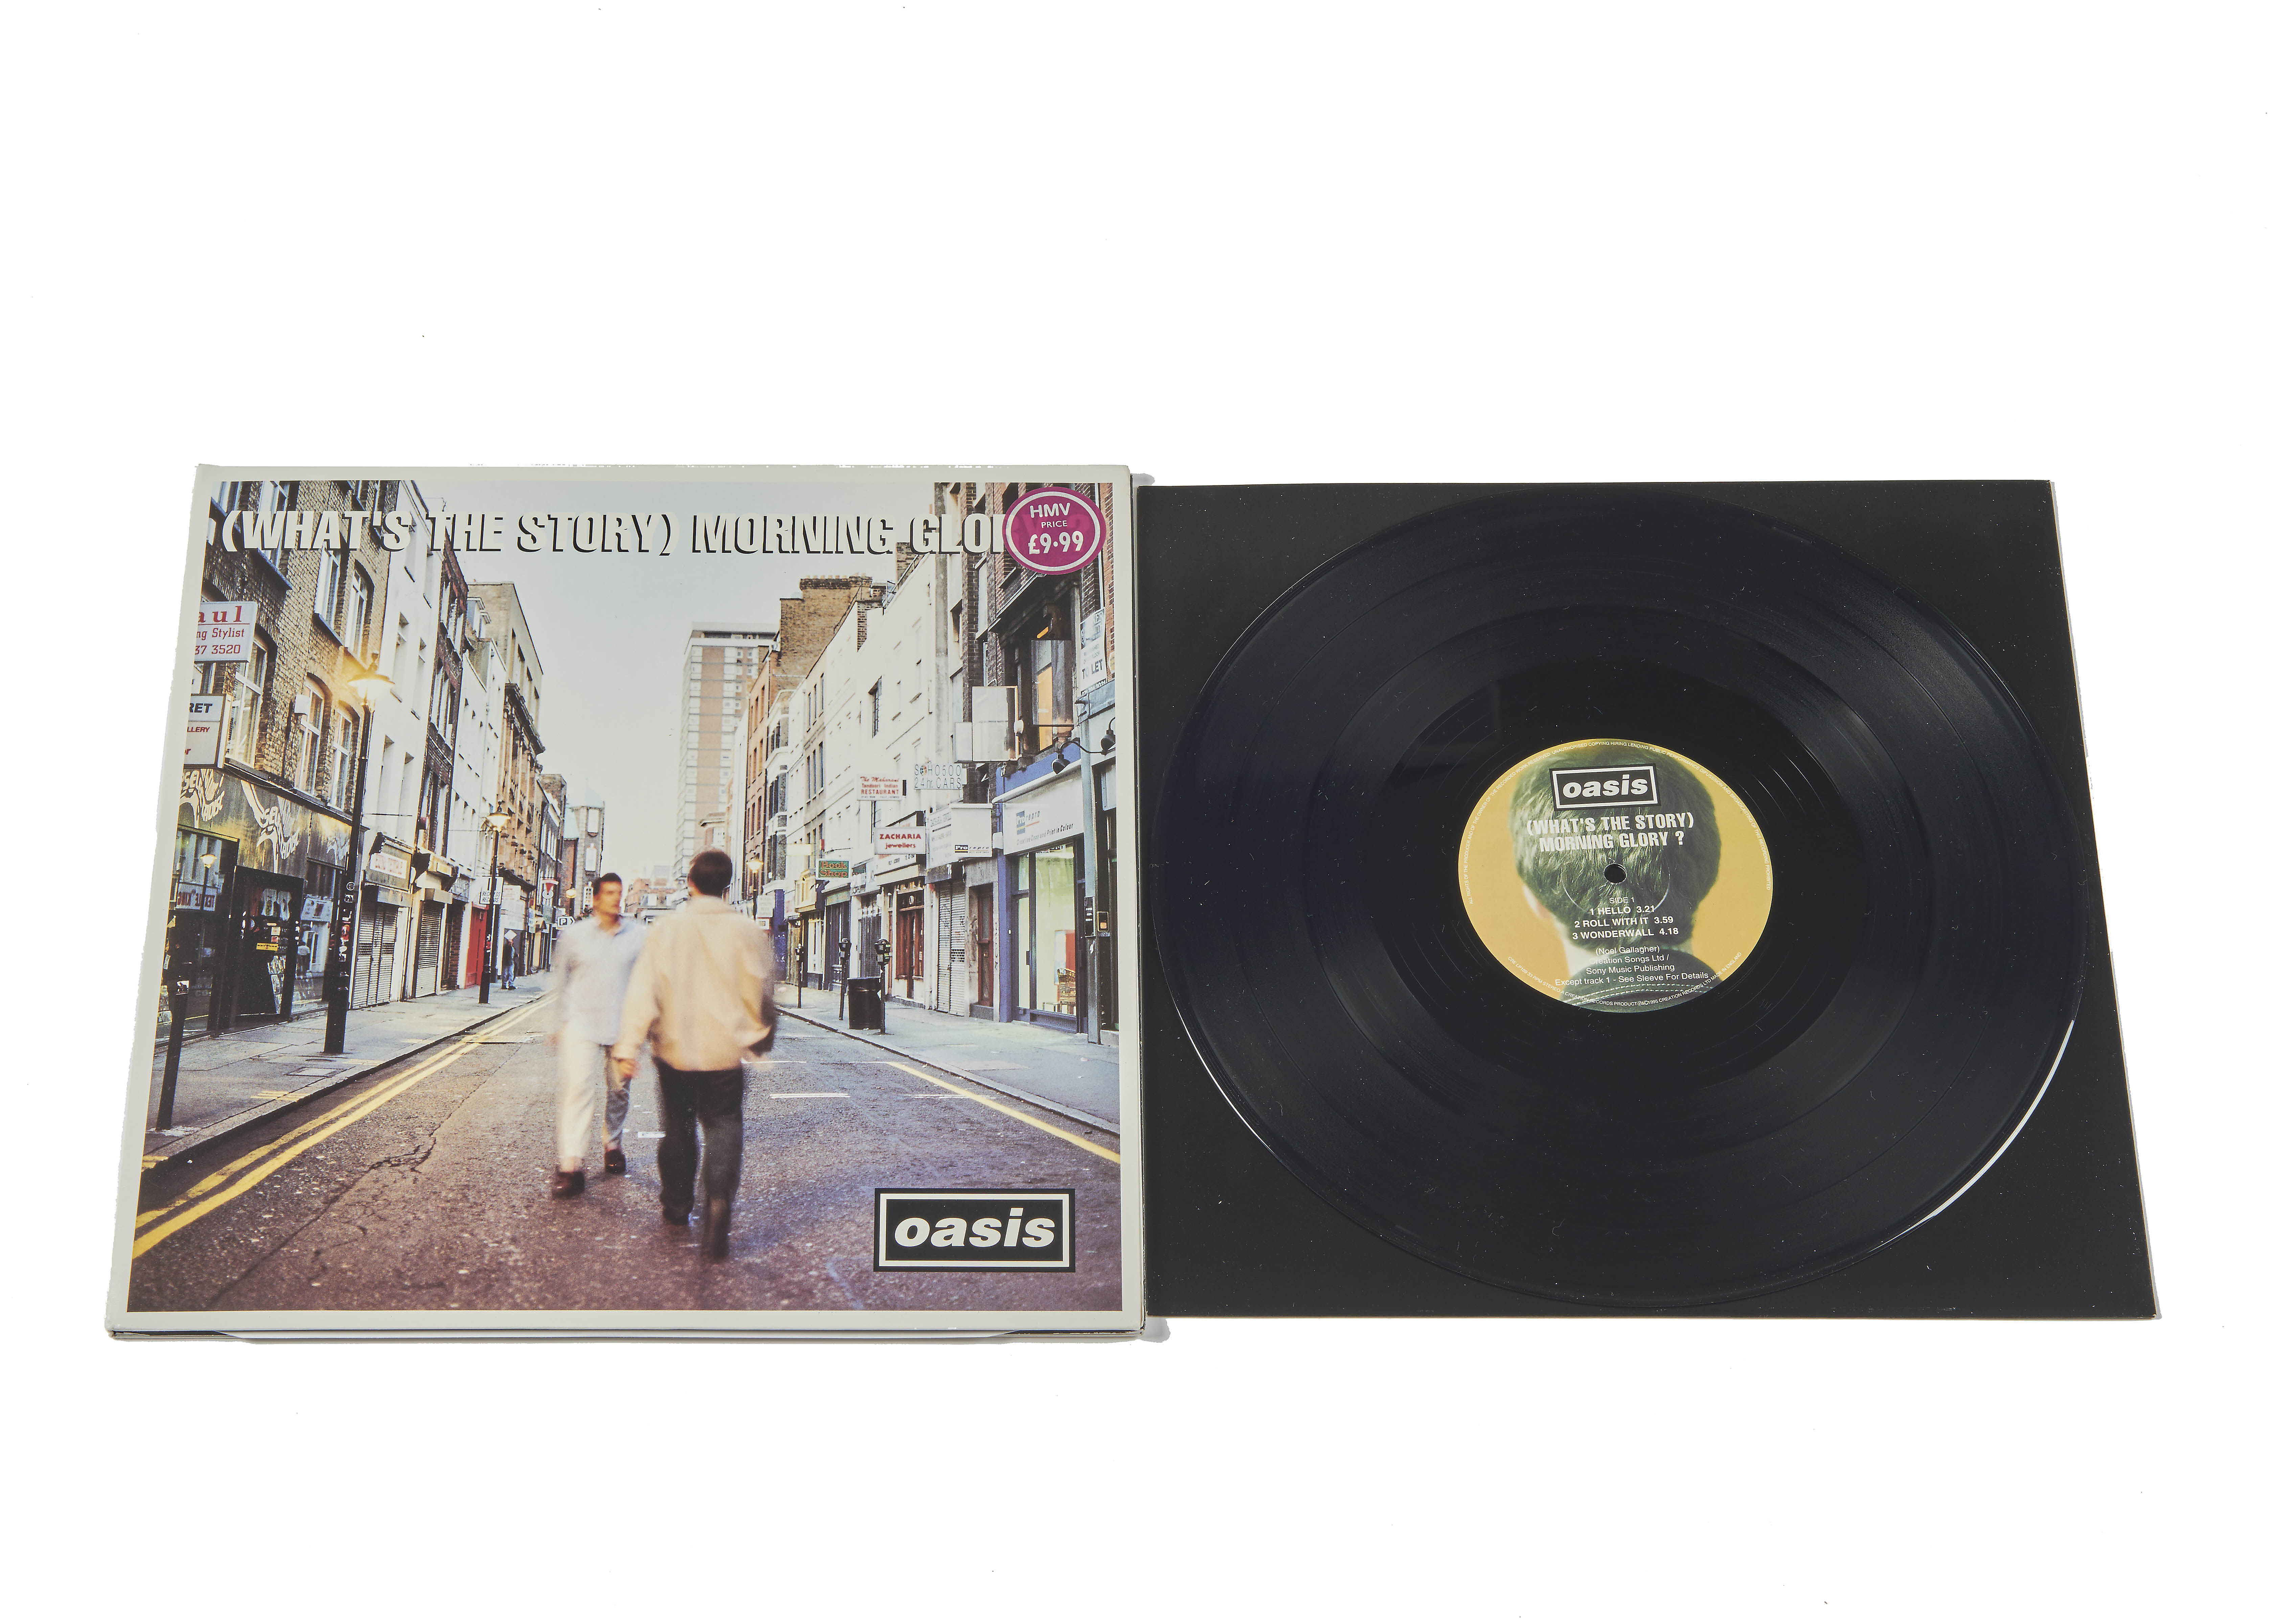 Oasis, What's The Story Morning Glory LP - Original UK Double Album release 1995 on Creation - CRE